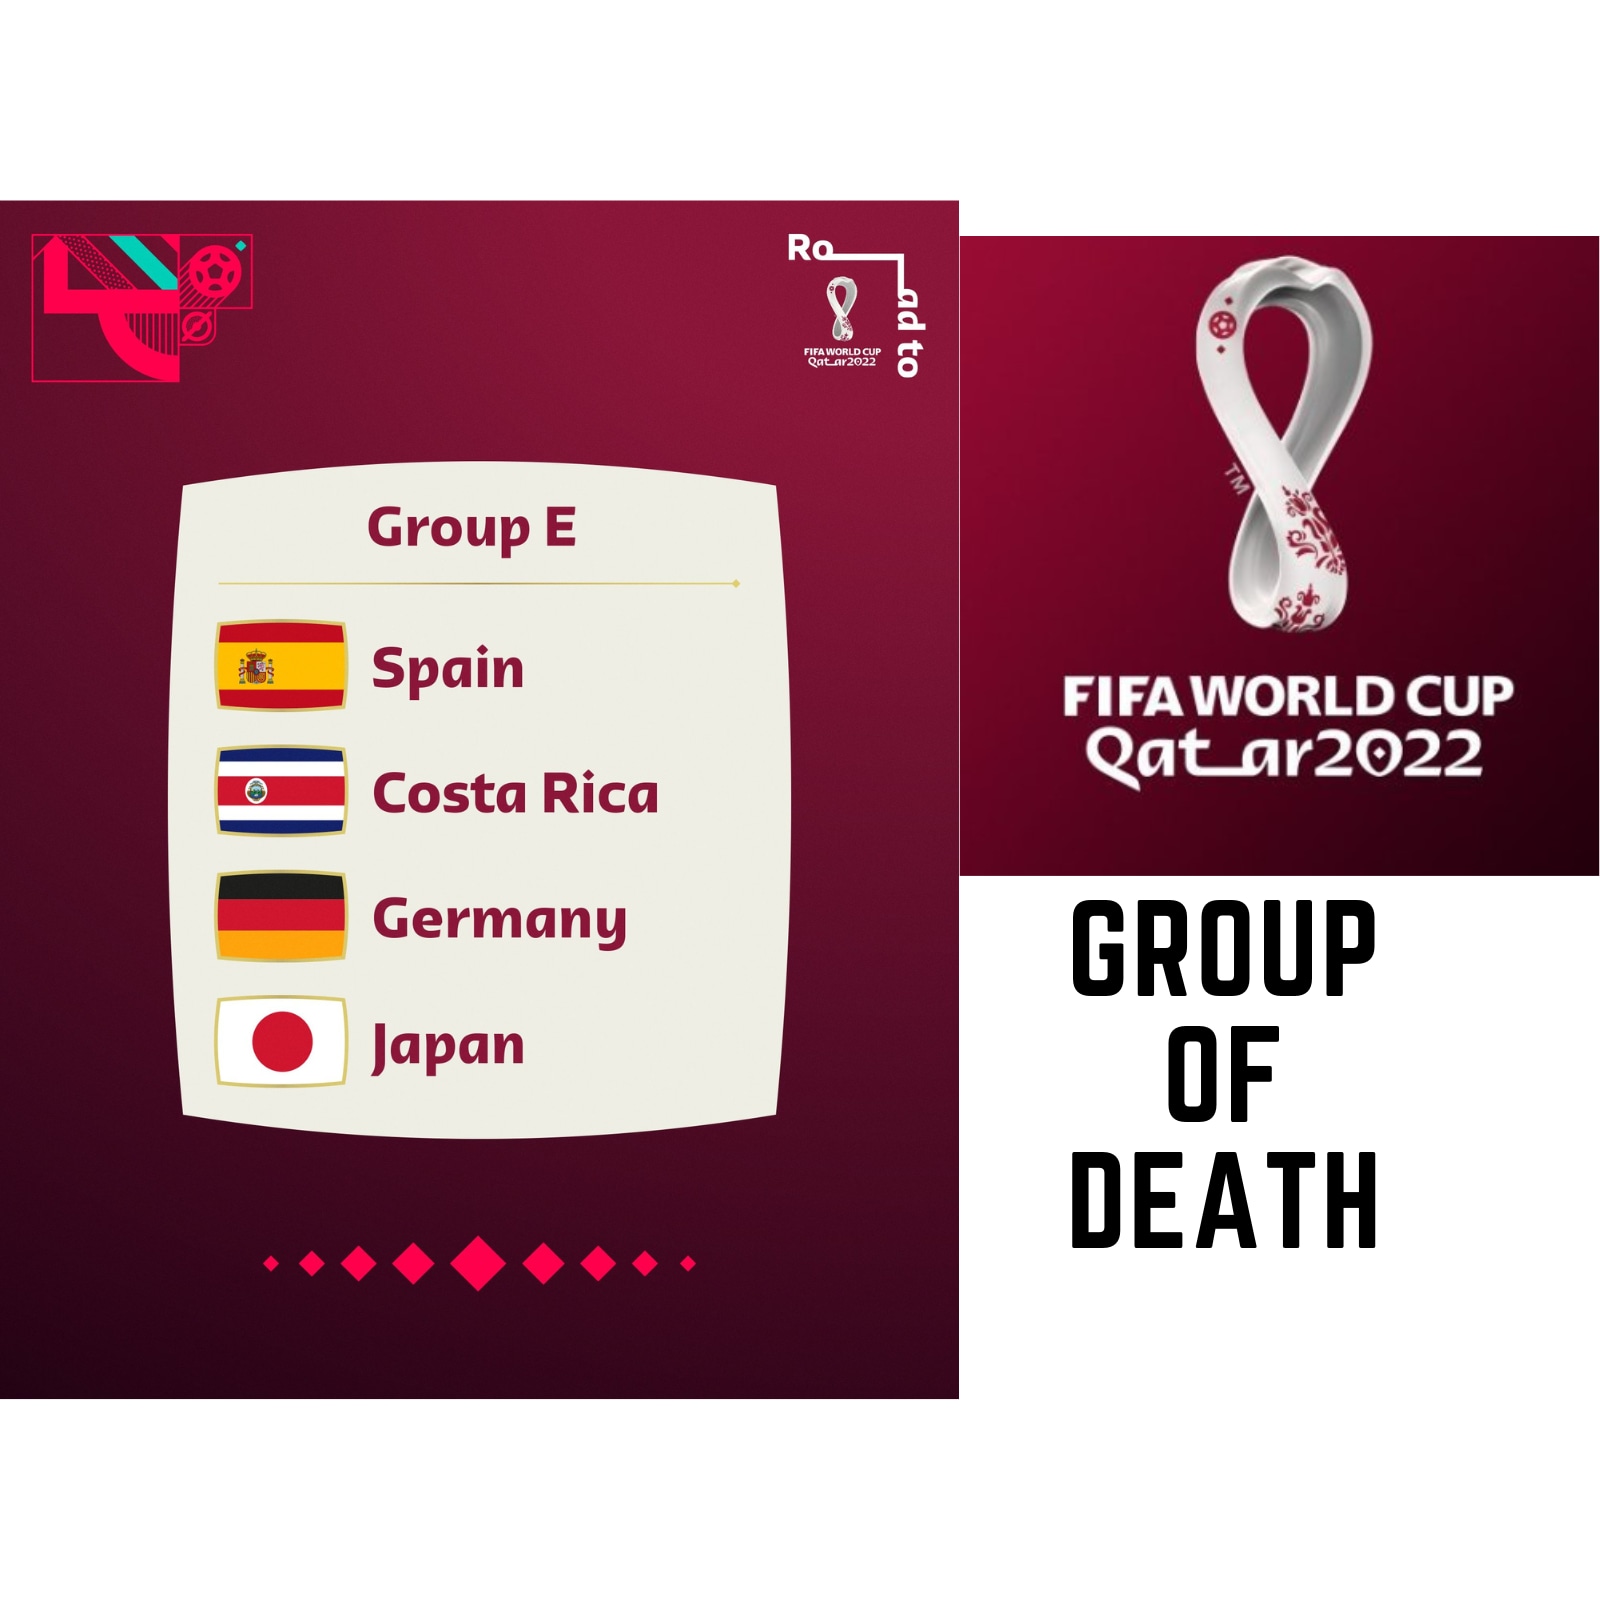 FIFA World Cup 2022 The Group of Death is Back in Qatar